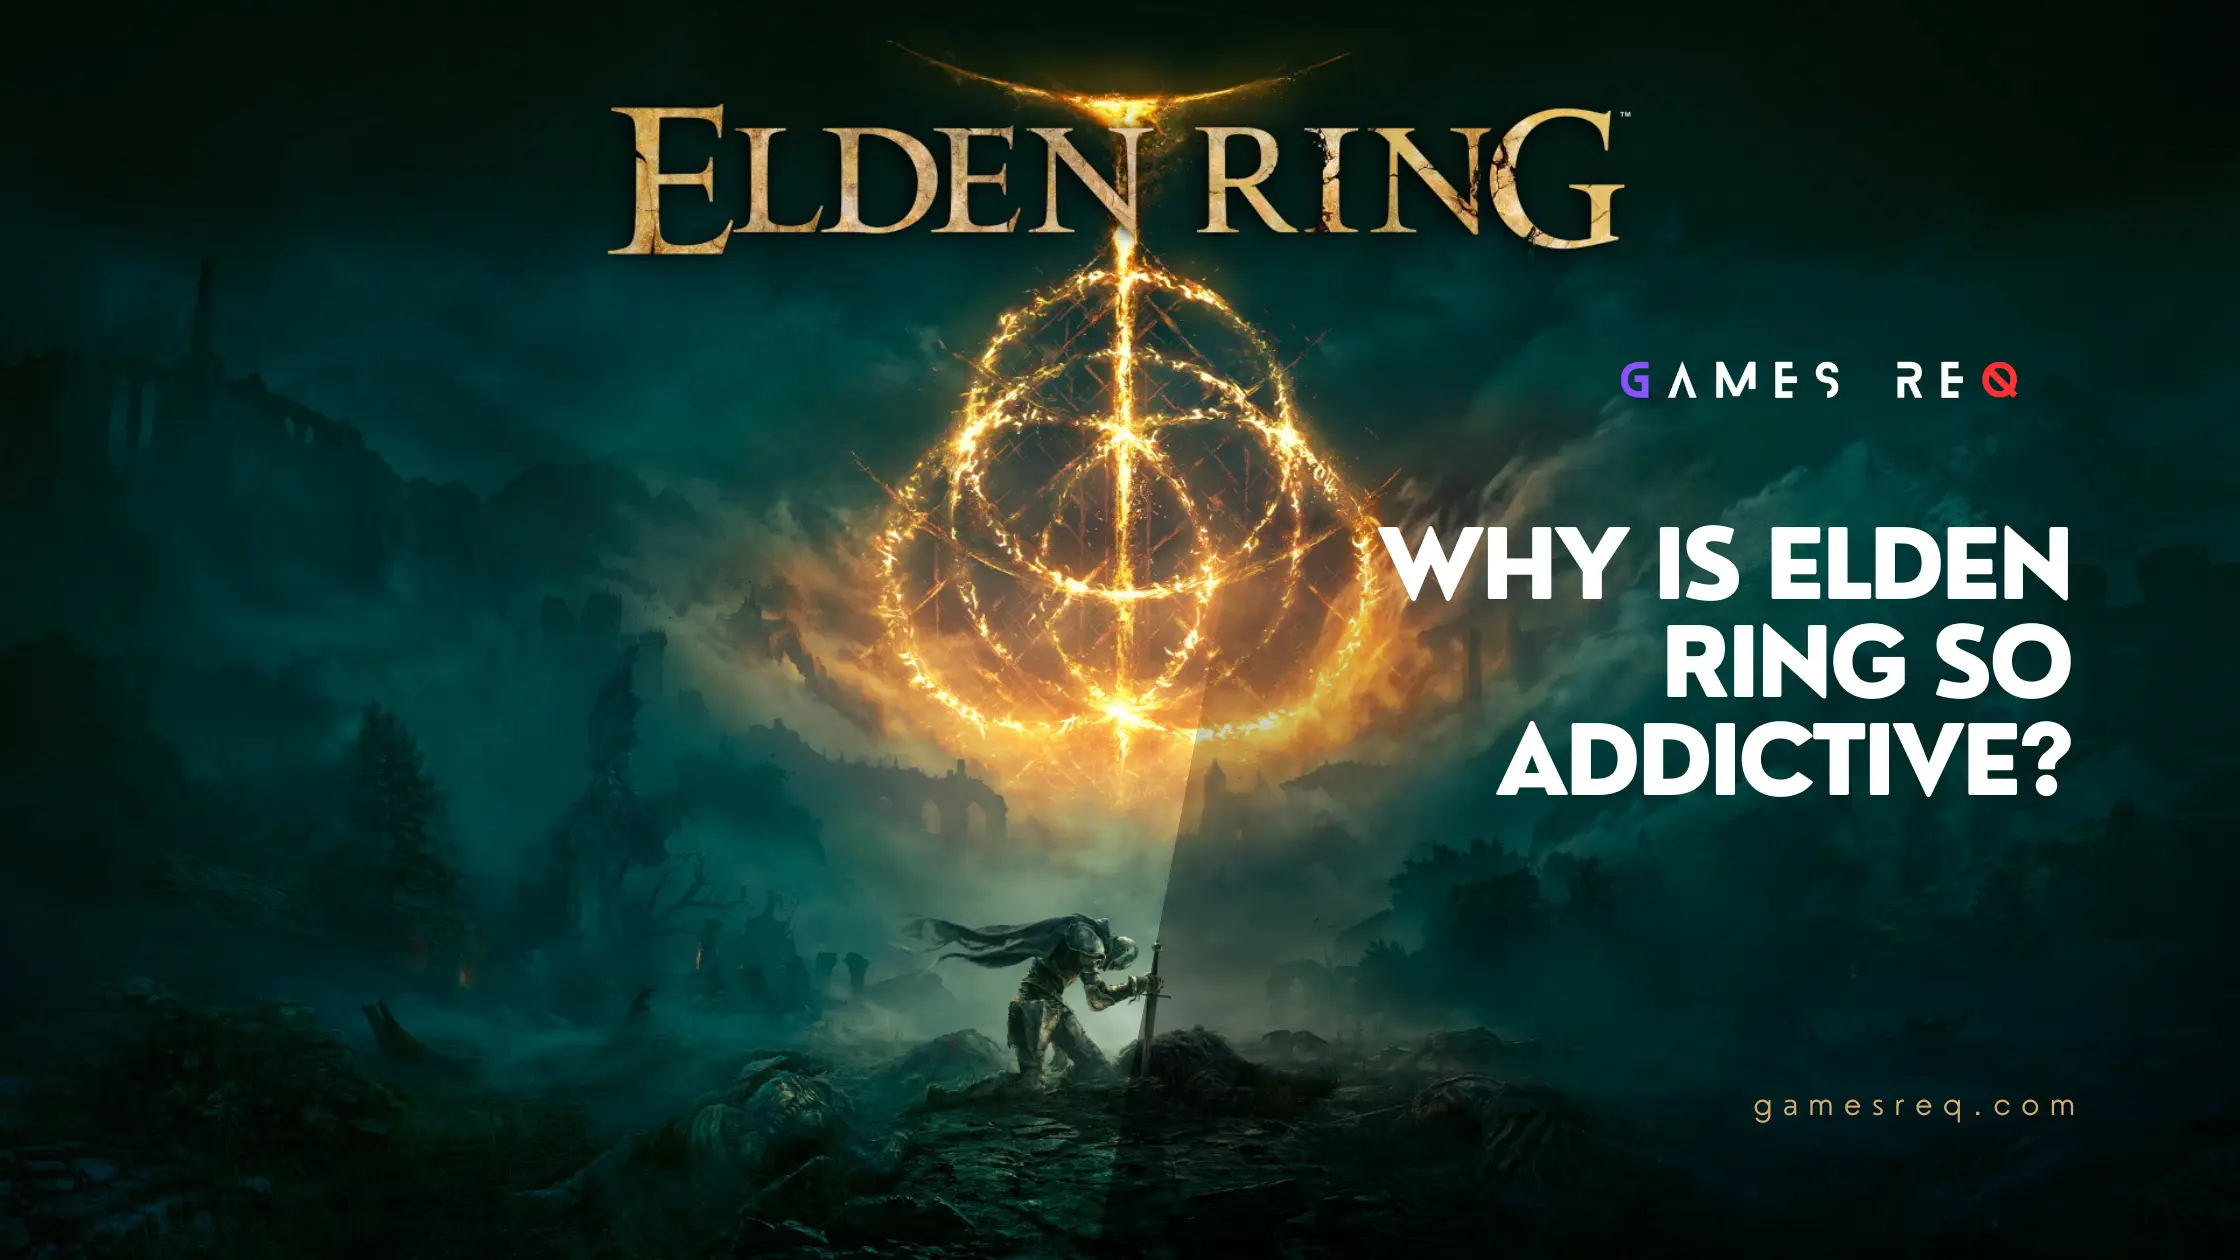 Why Is Elden Ring So Addictive